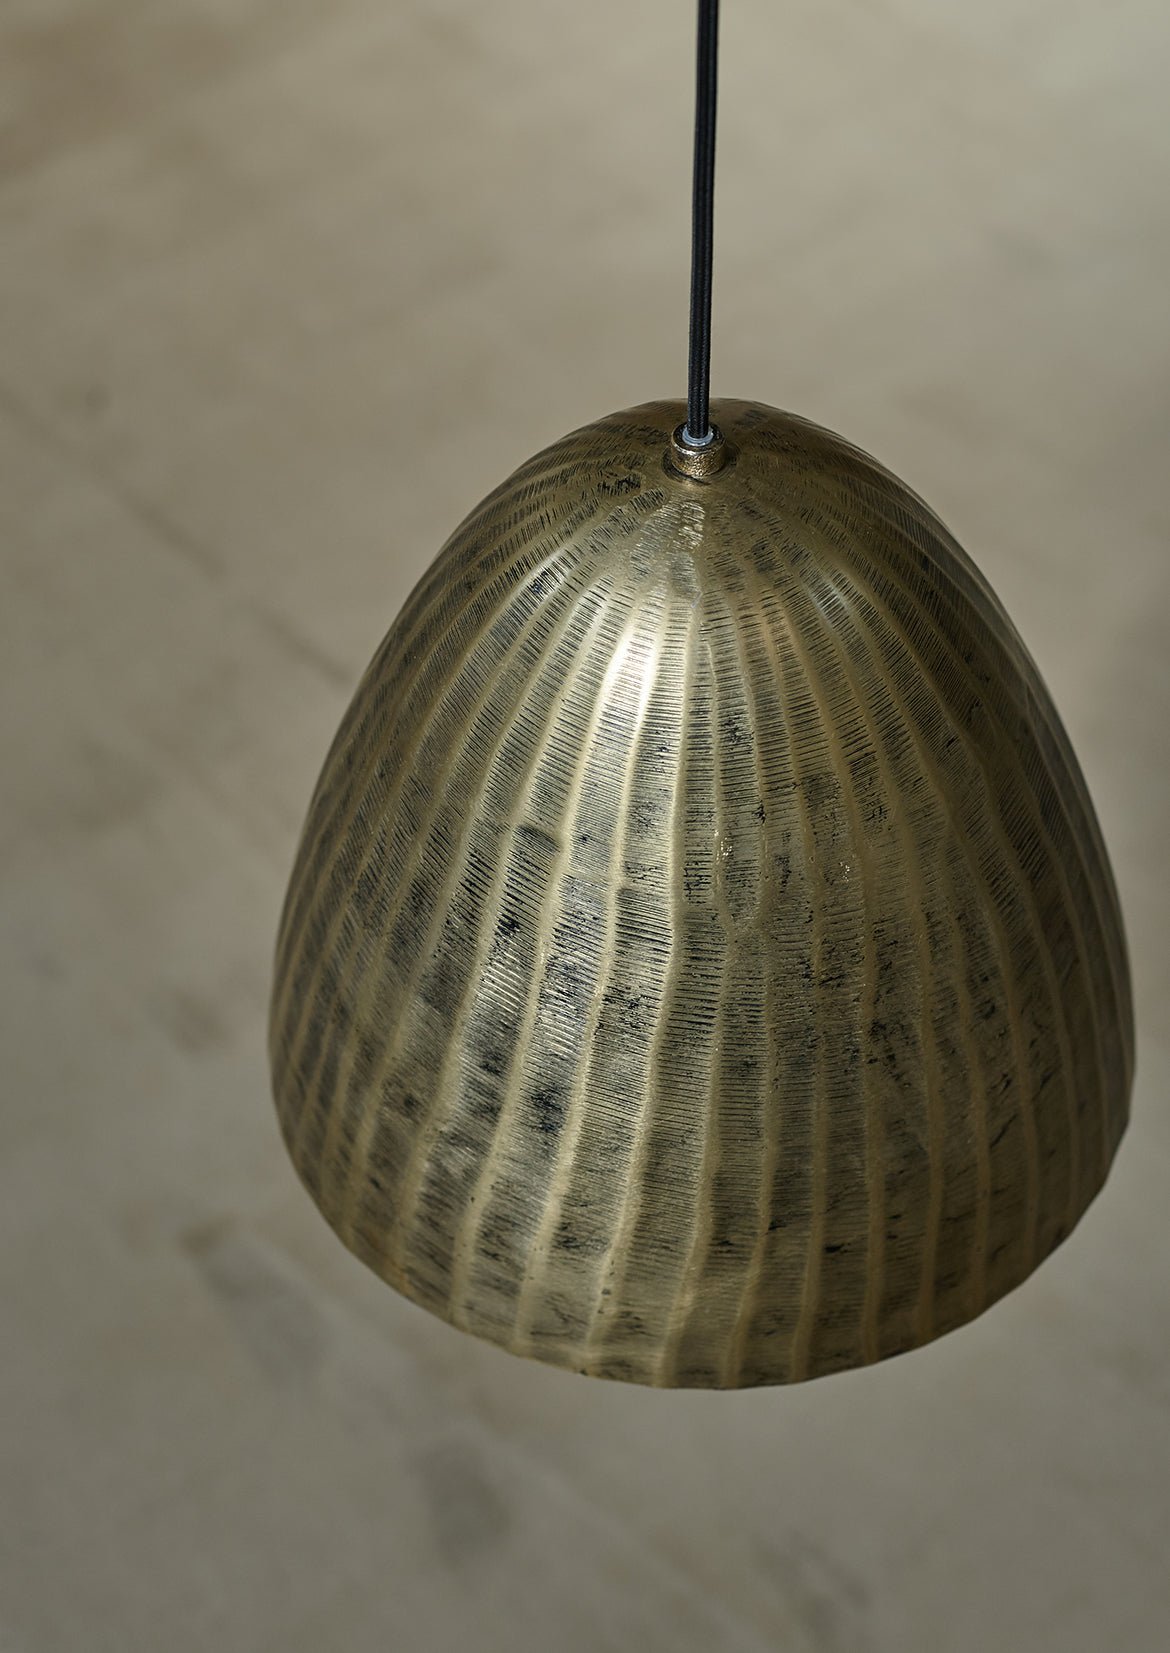 Handcrafted Antique Brass Dome Pendant Light by ALOTOF - ALOTOFBRASSERA